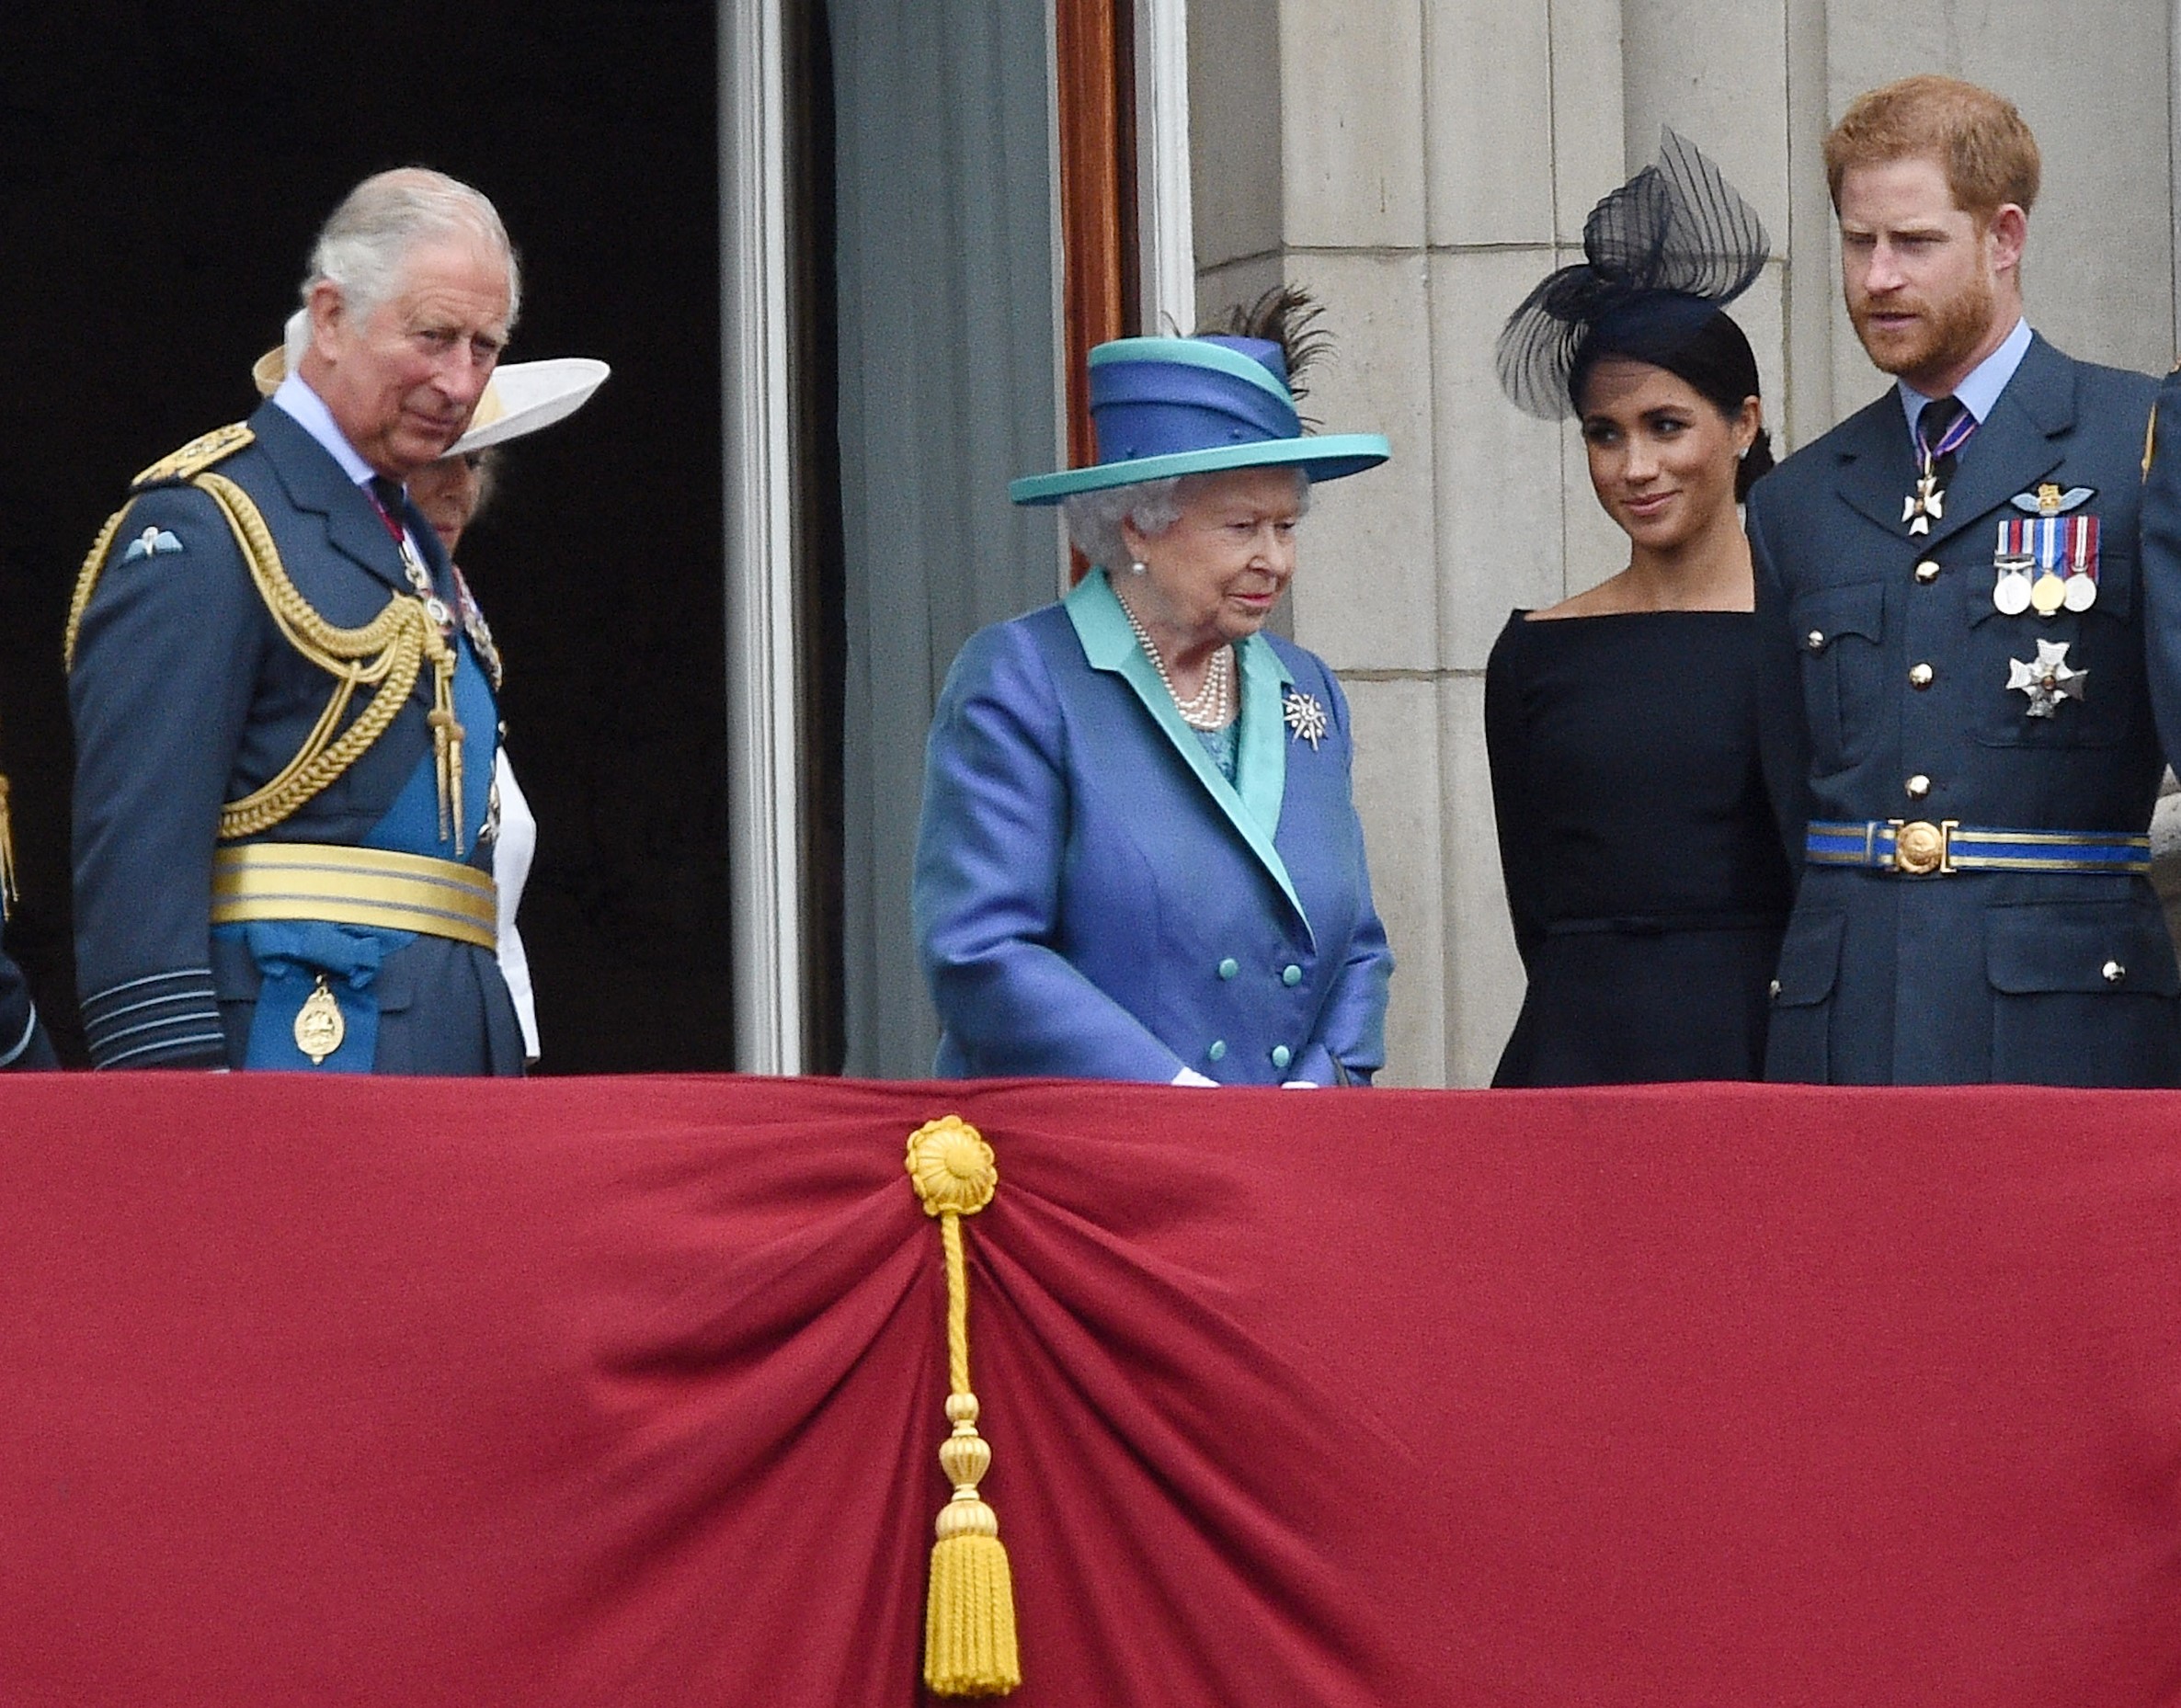 Prince Charles, Camilla, Queen Elizabeth II, Meghan Markle, and Prince Harry on the Buckingham Palace balcony